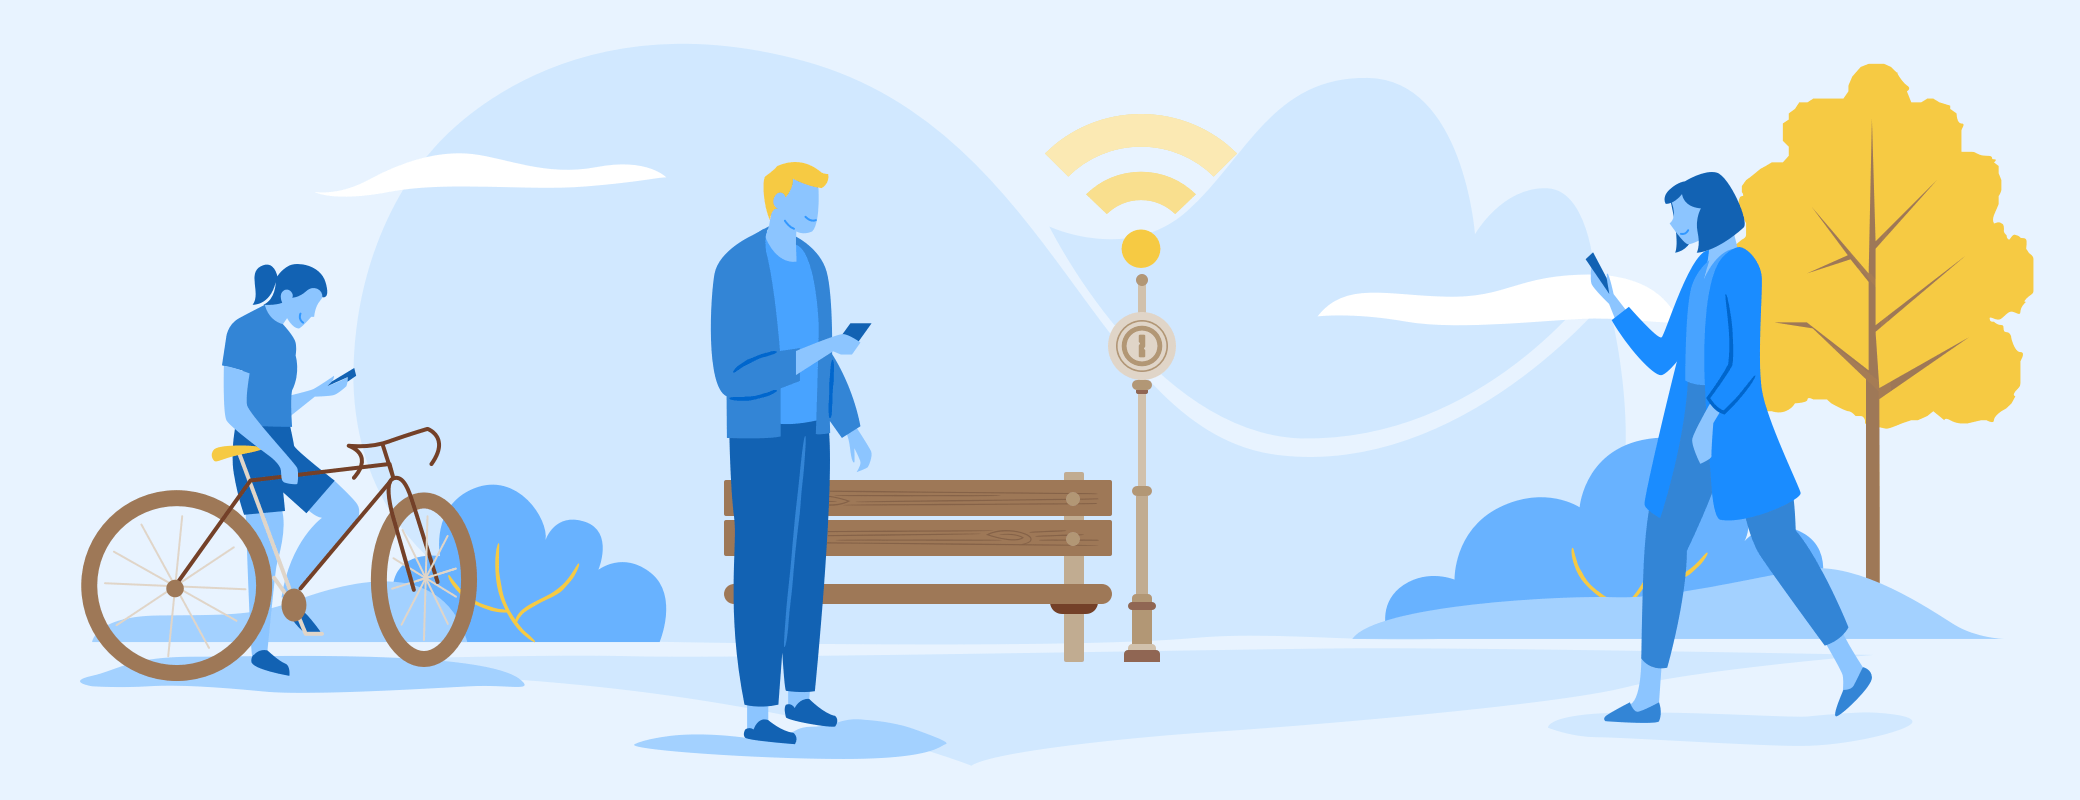 How to stay safe on public Wi-Fi - 7 security tips